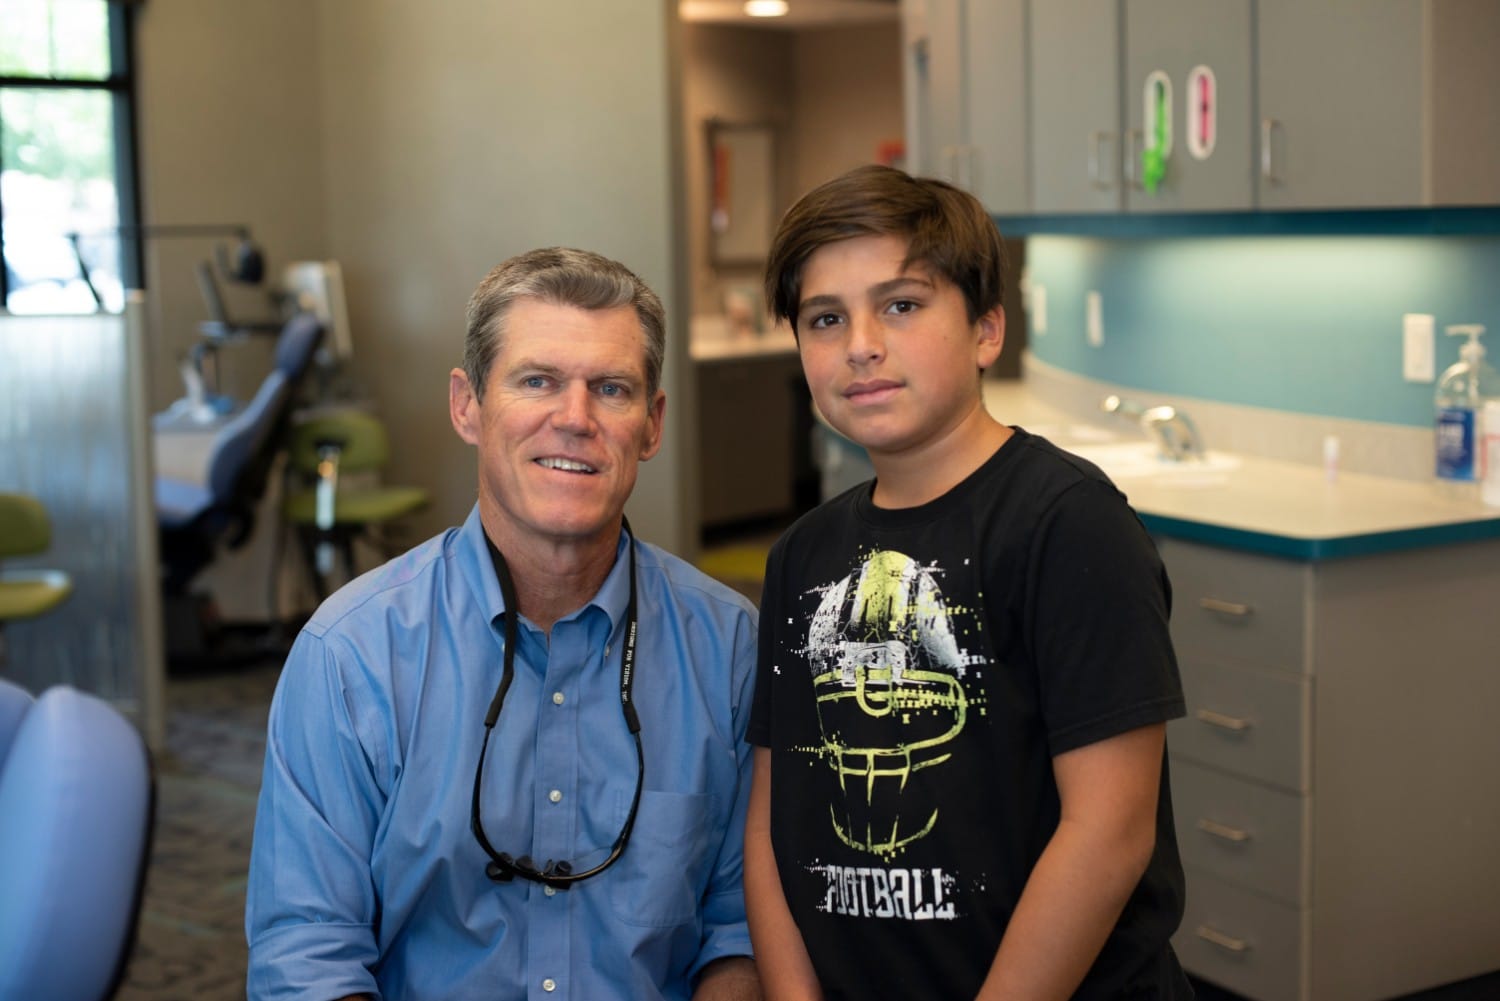 Dr. Buttram with a patient